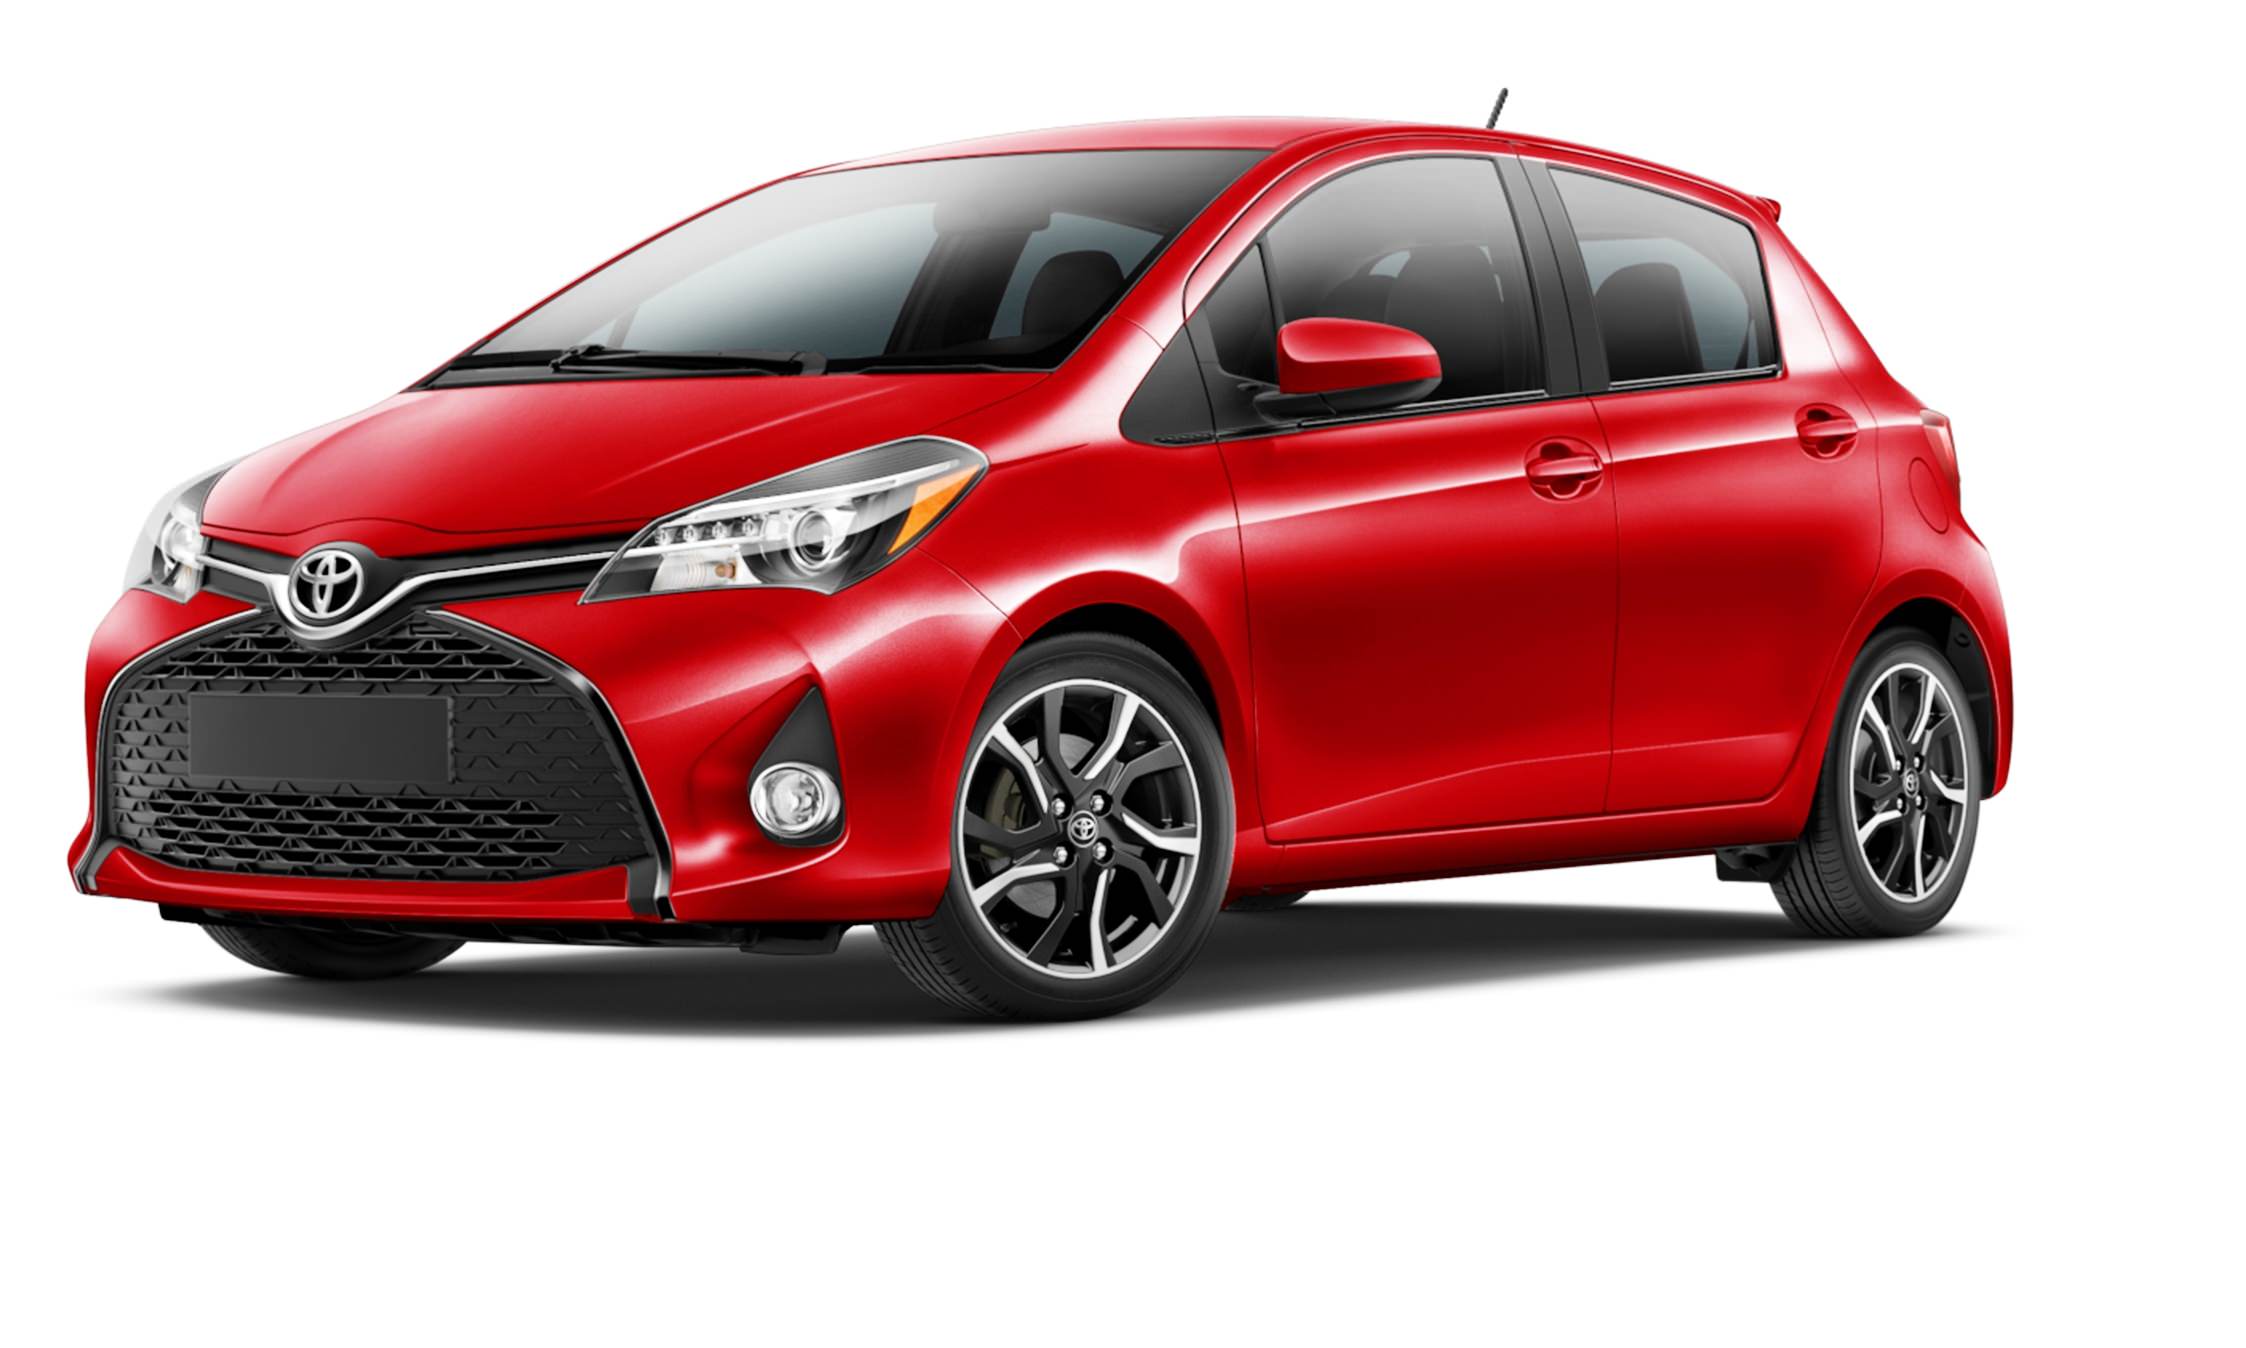 2015 Toyota Yaris Adds LED Style and Standard Touchscreen